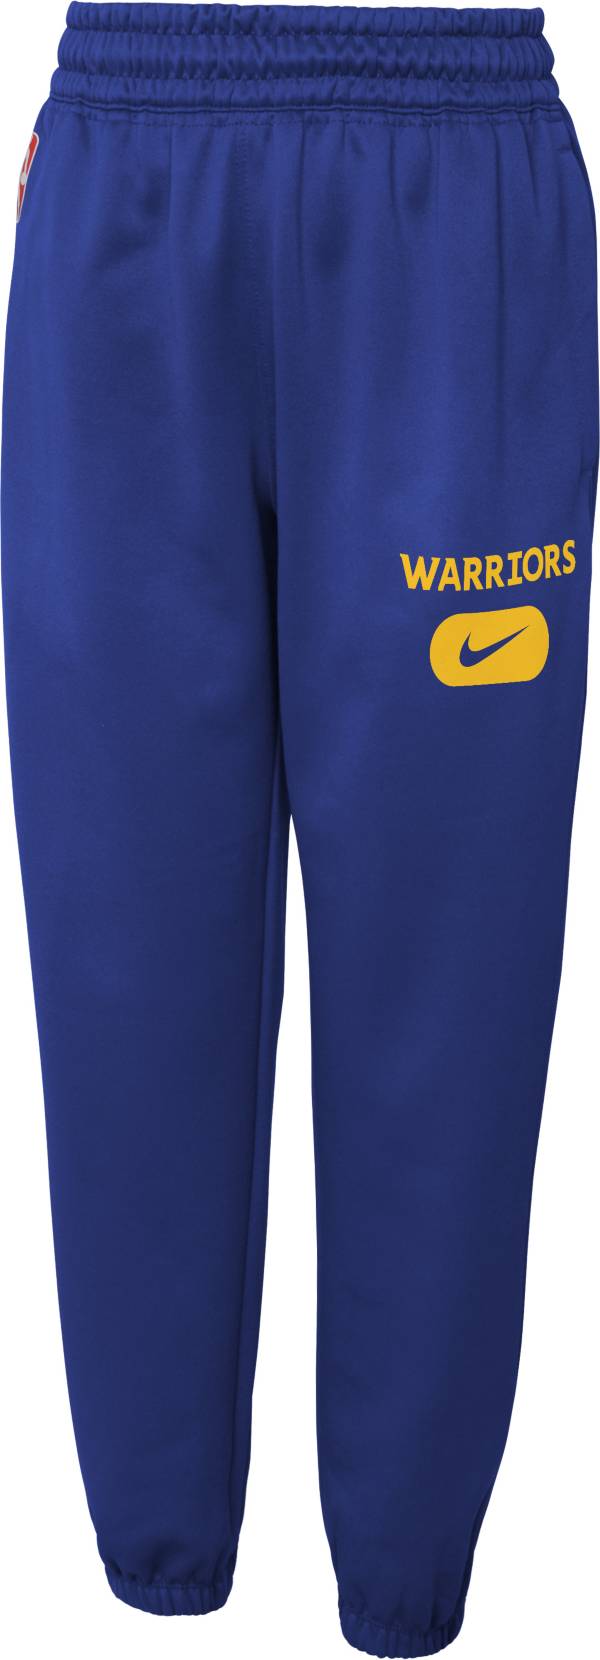 Nike Youth Golden State Warriors Blue Spotlight Sweatpants product image